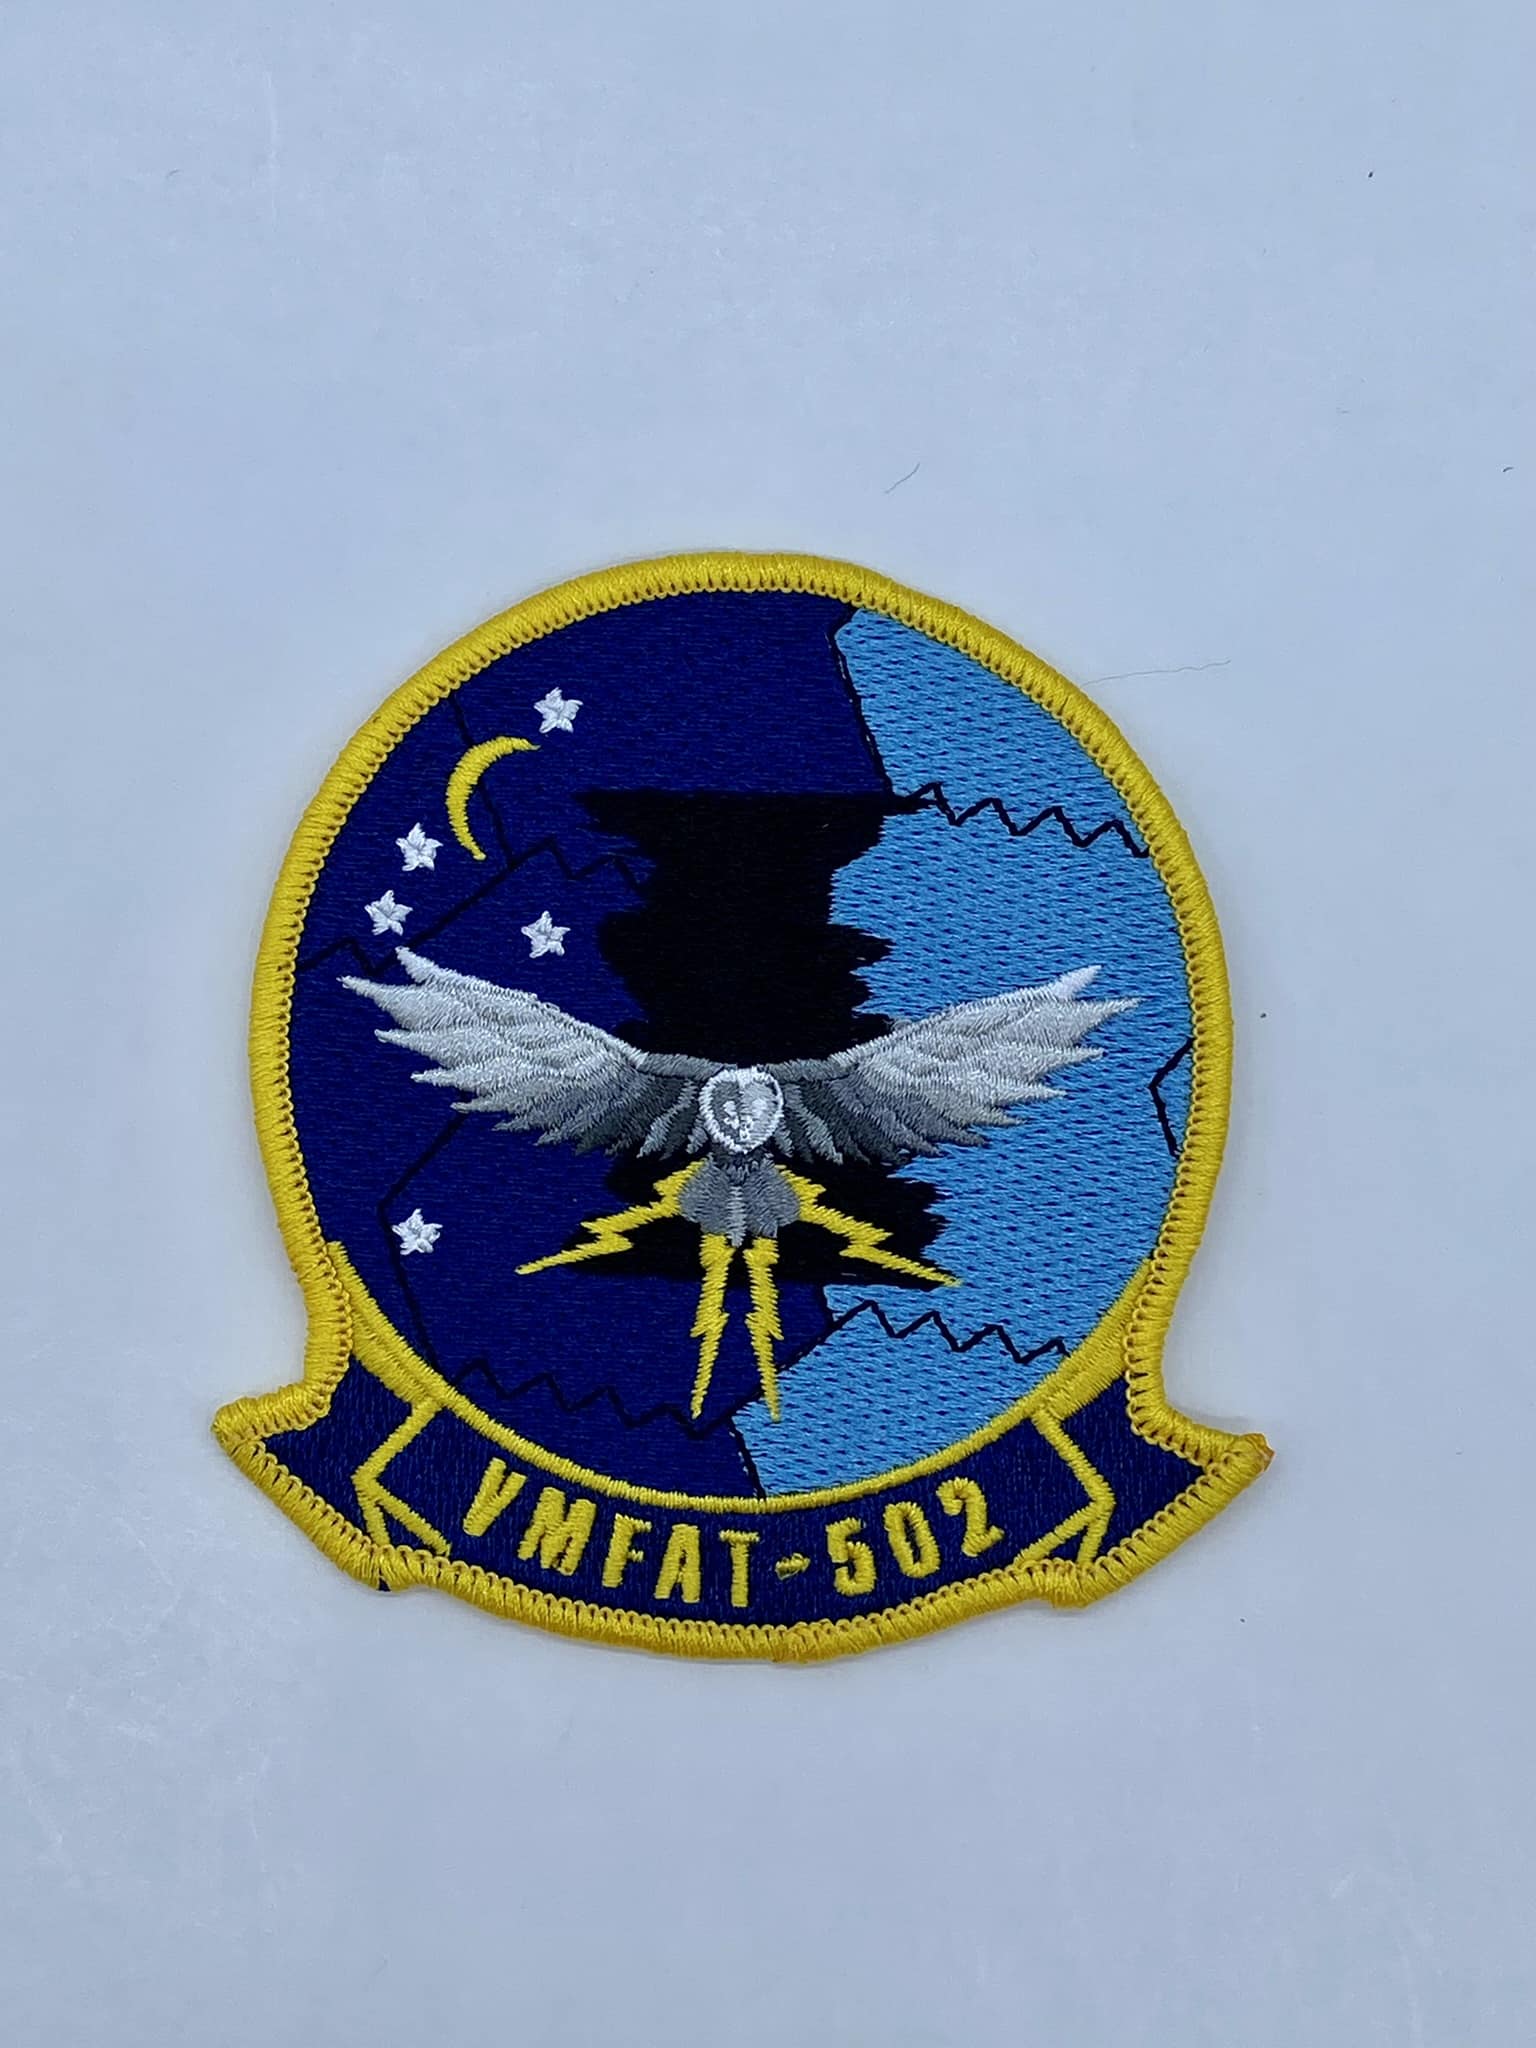 VMFAT-502 Nightmares Chest Patch - With Hook and Loop